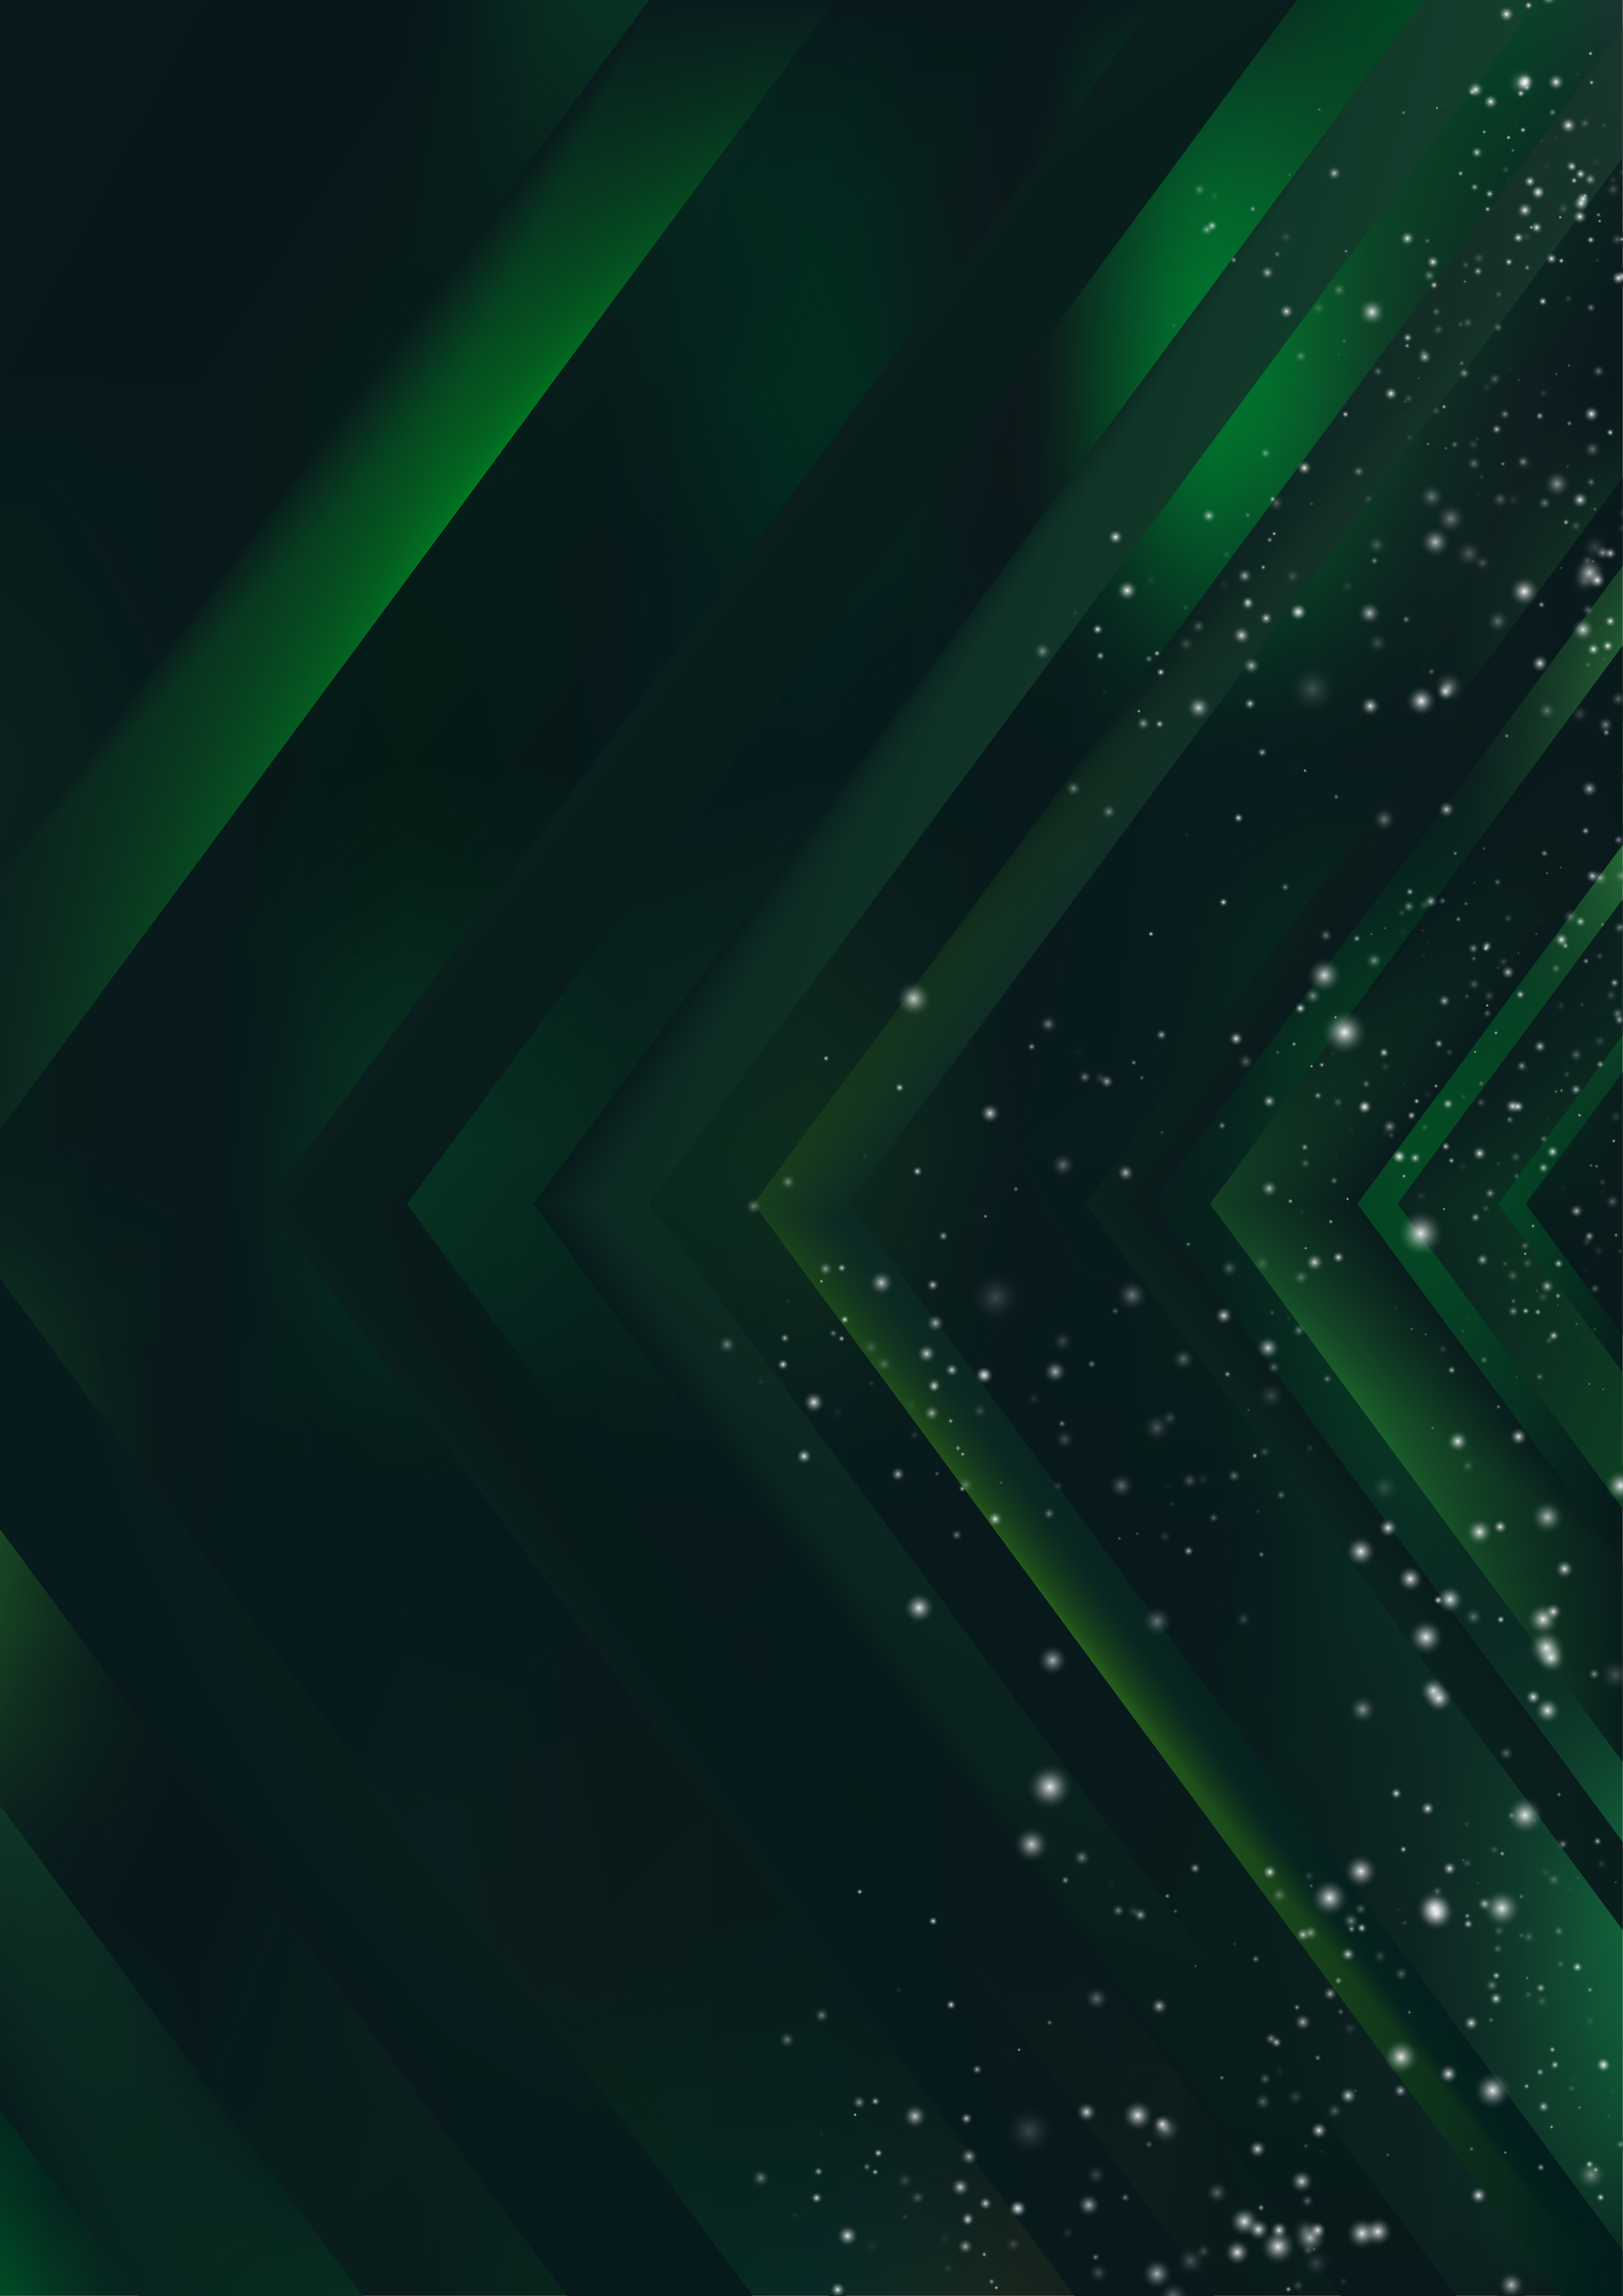 Free Abstract Shiny Green and Black Background Design